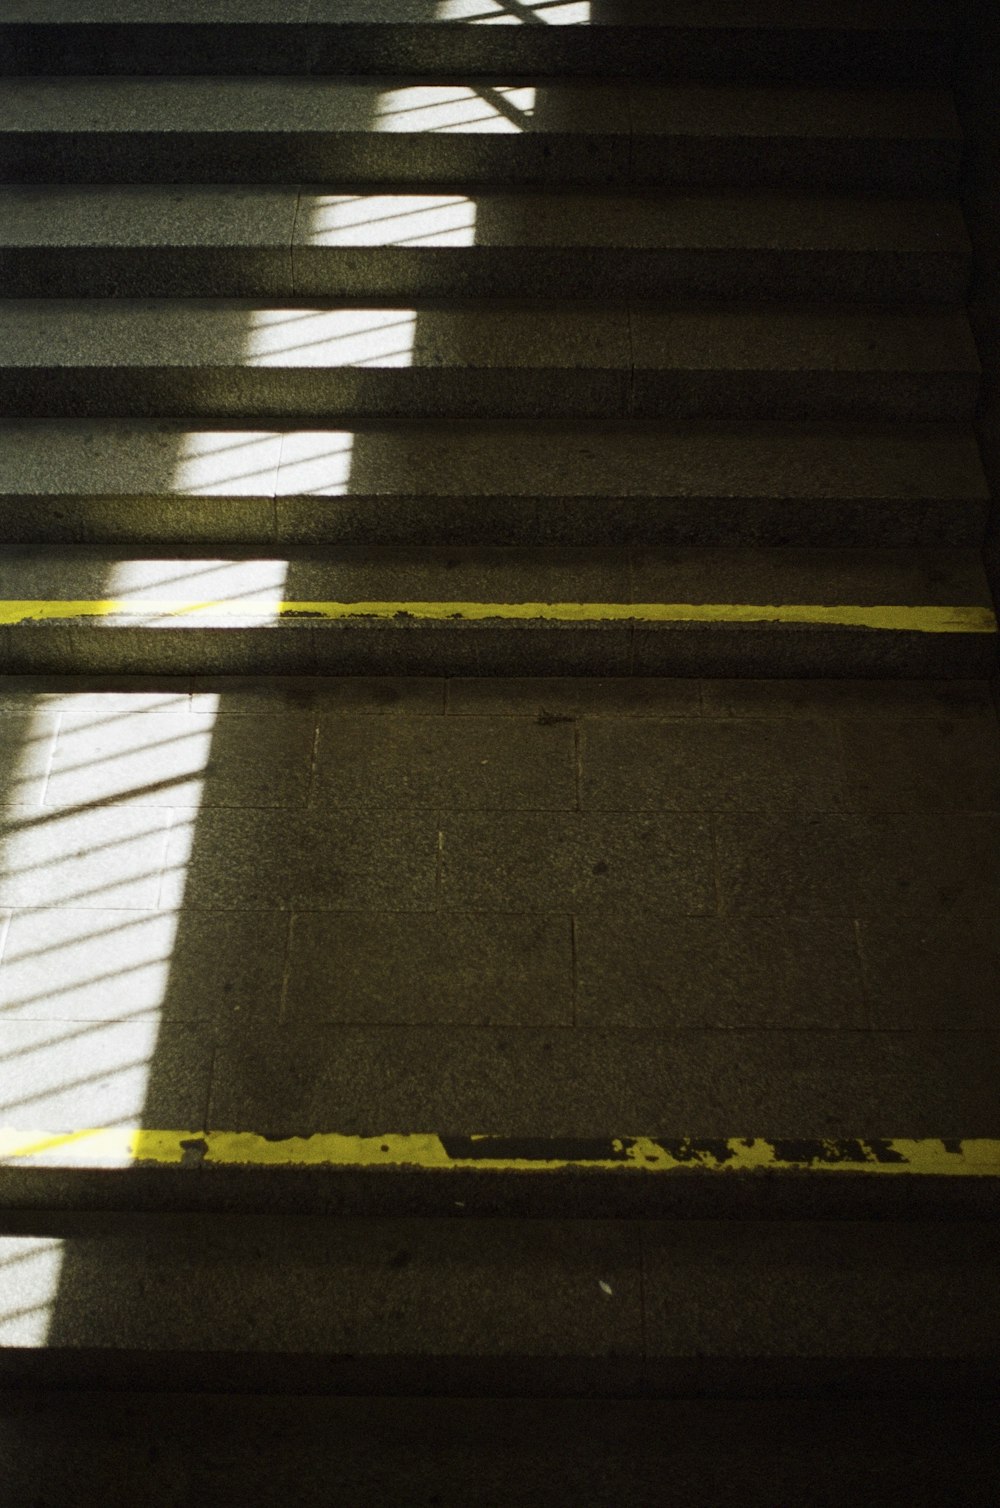 a stair case with a yellow line painted on it